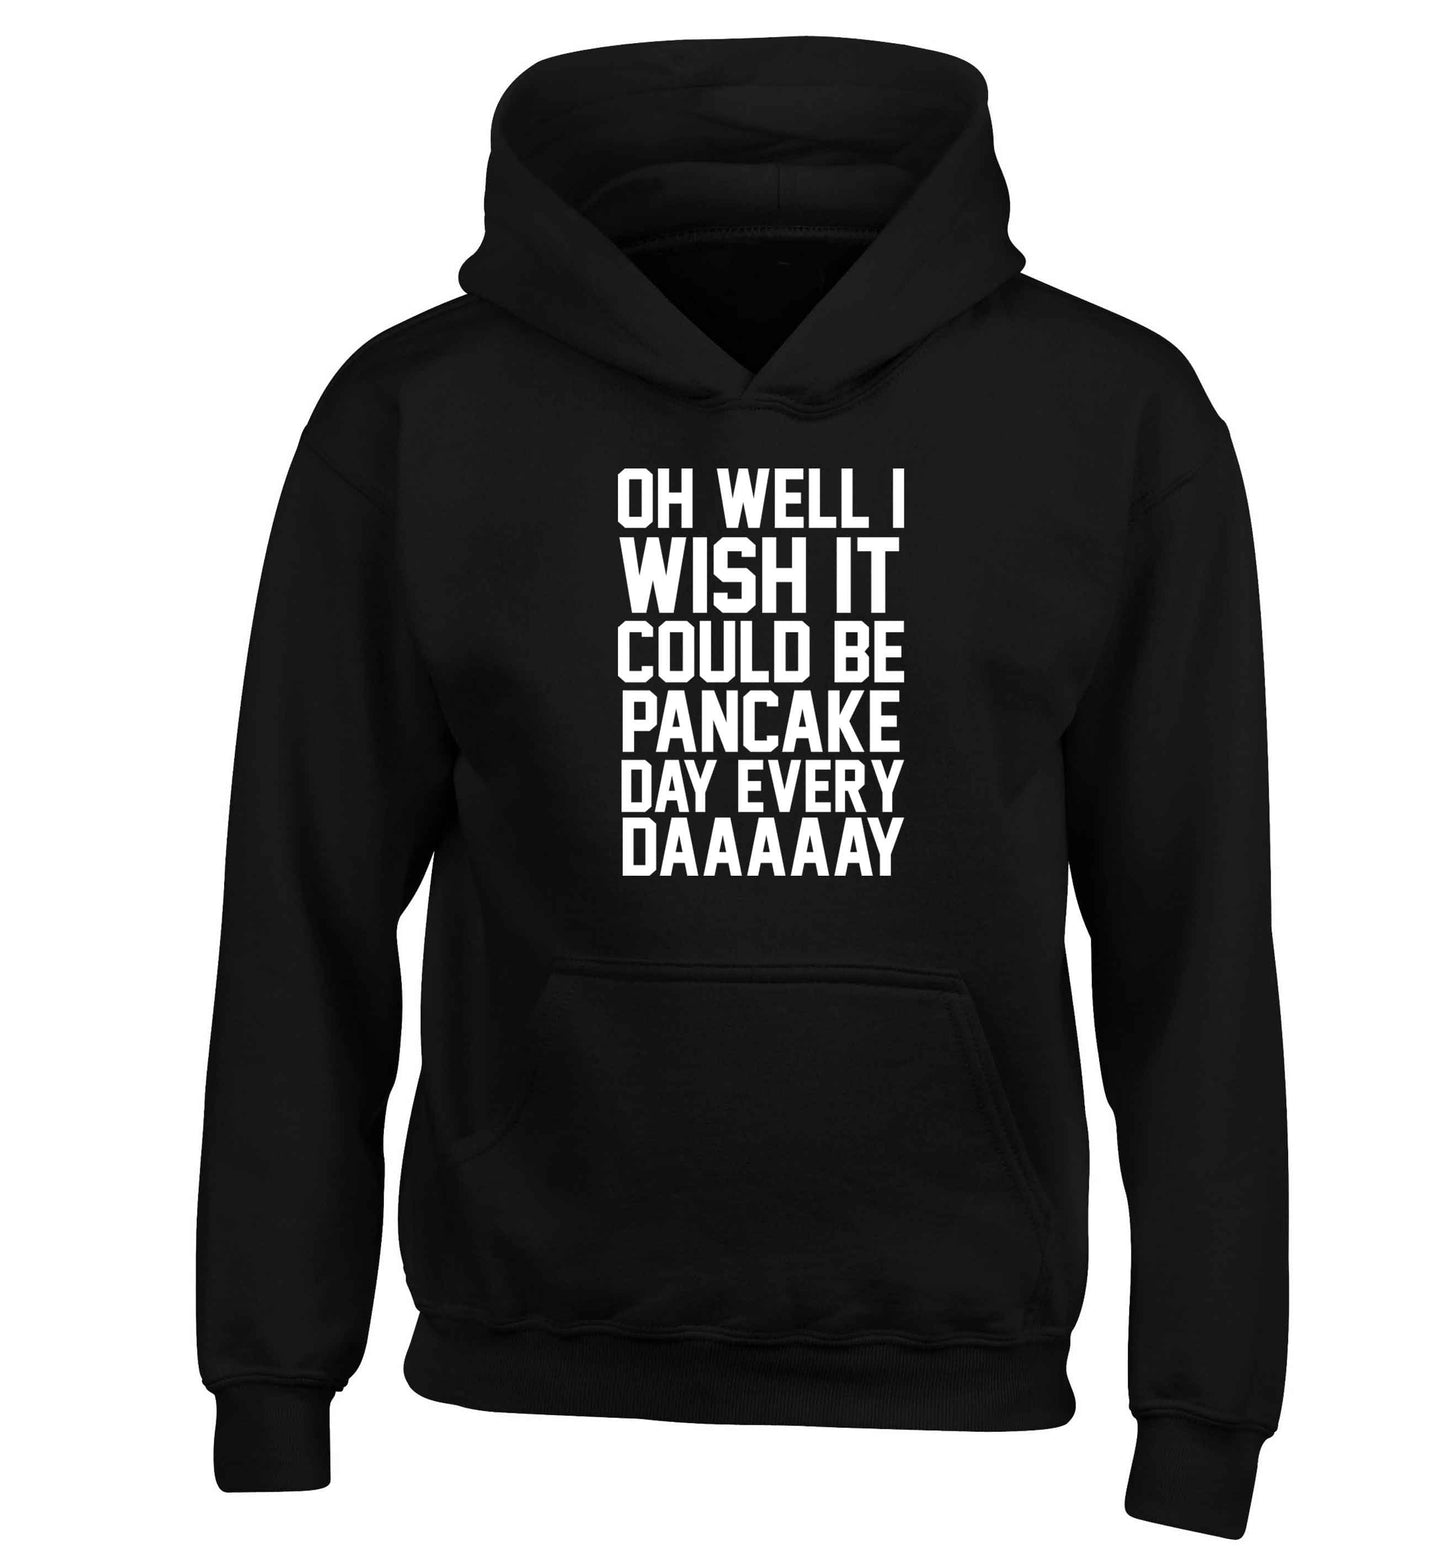 Oh well I wish it could be pancake day every day children's black hoodie 12-13 Years